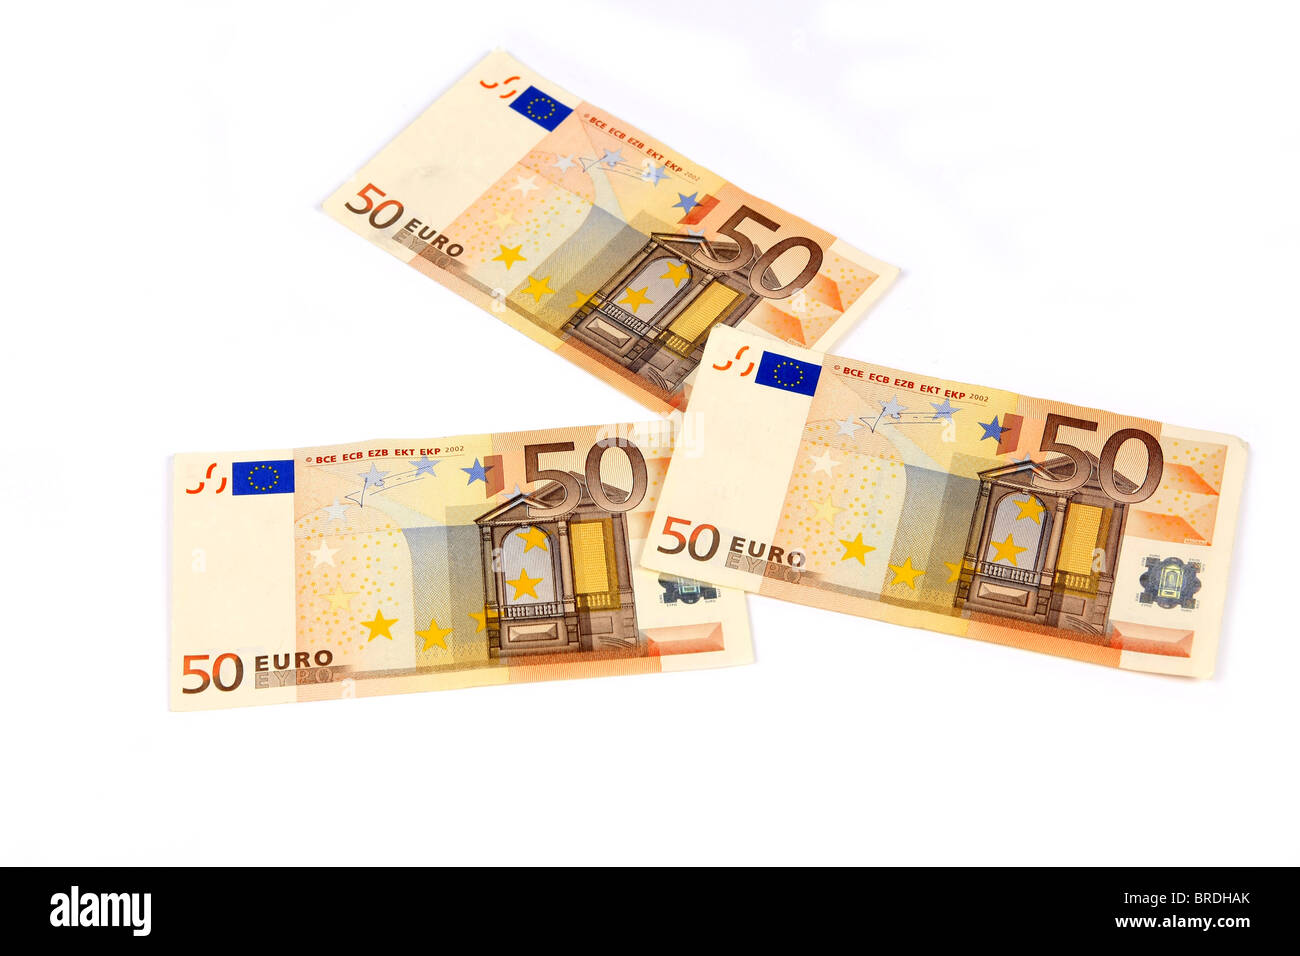 50 Euro Notes High Resolution Stock Photography and Images - Alamy